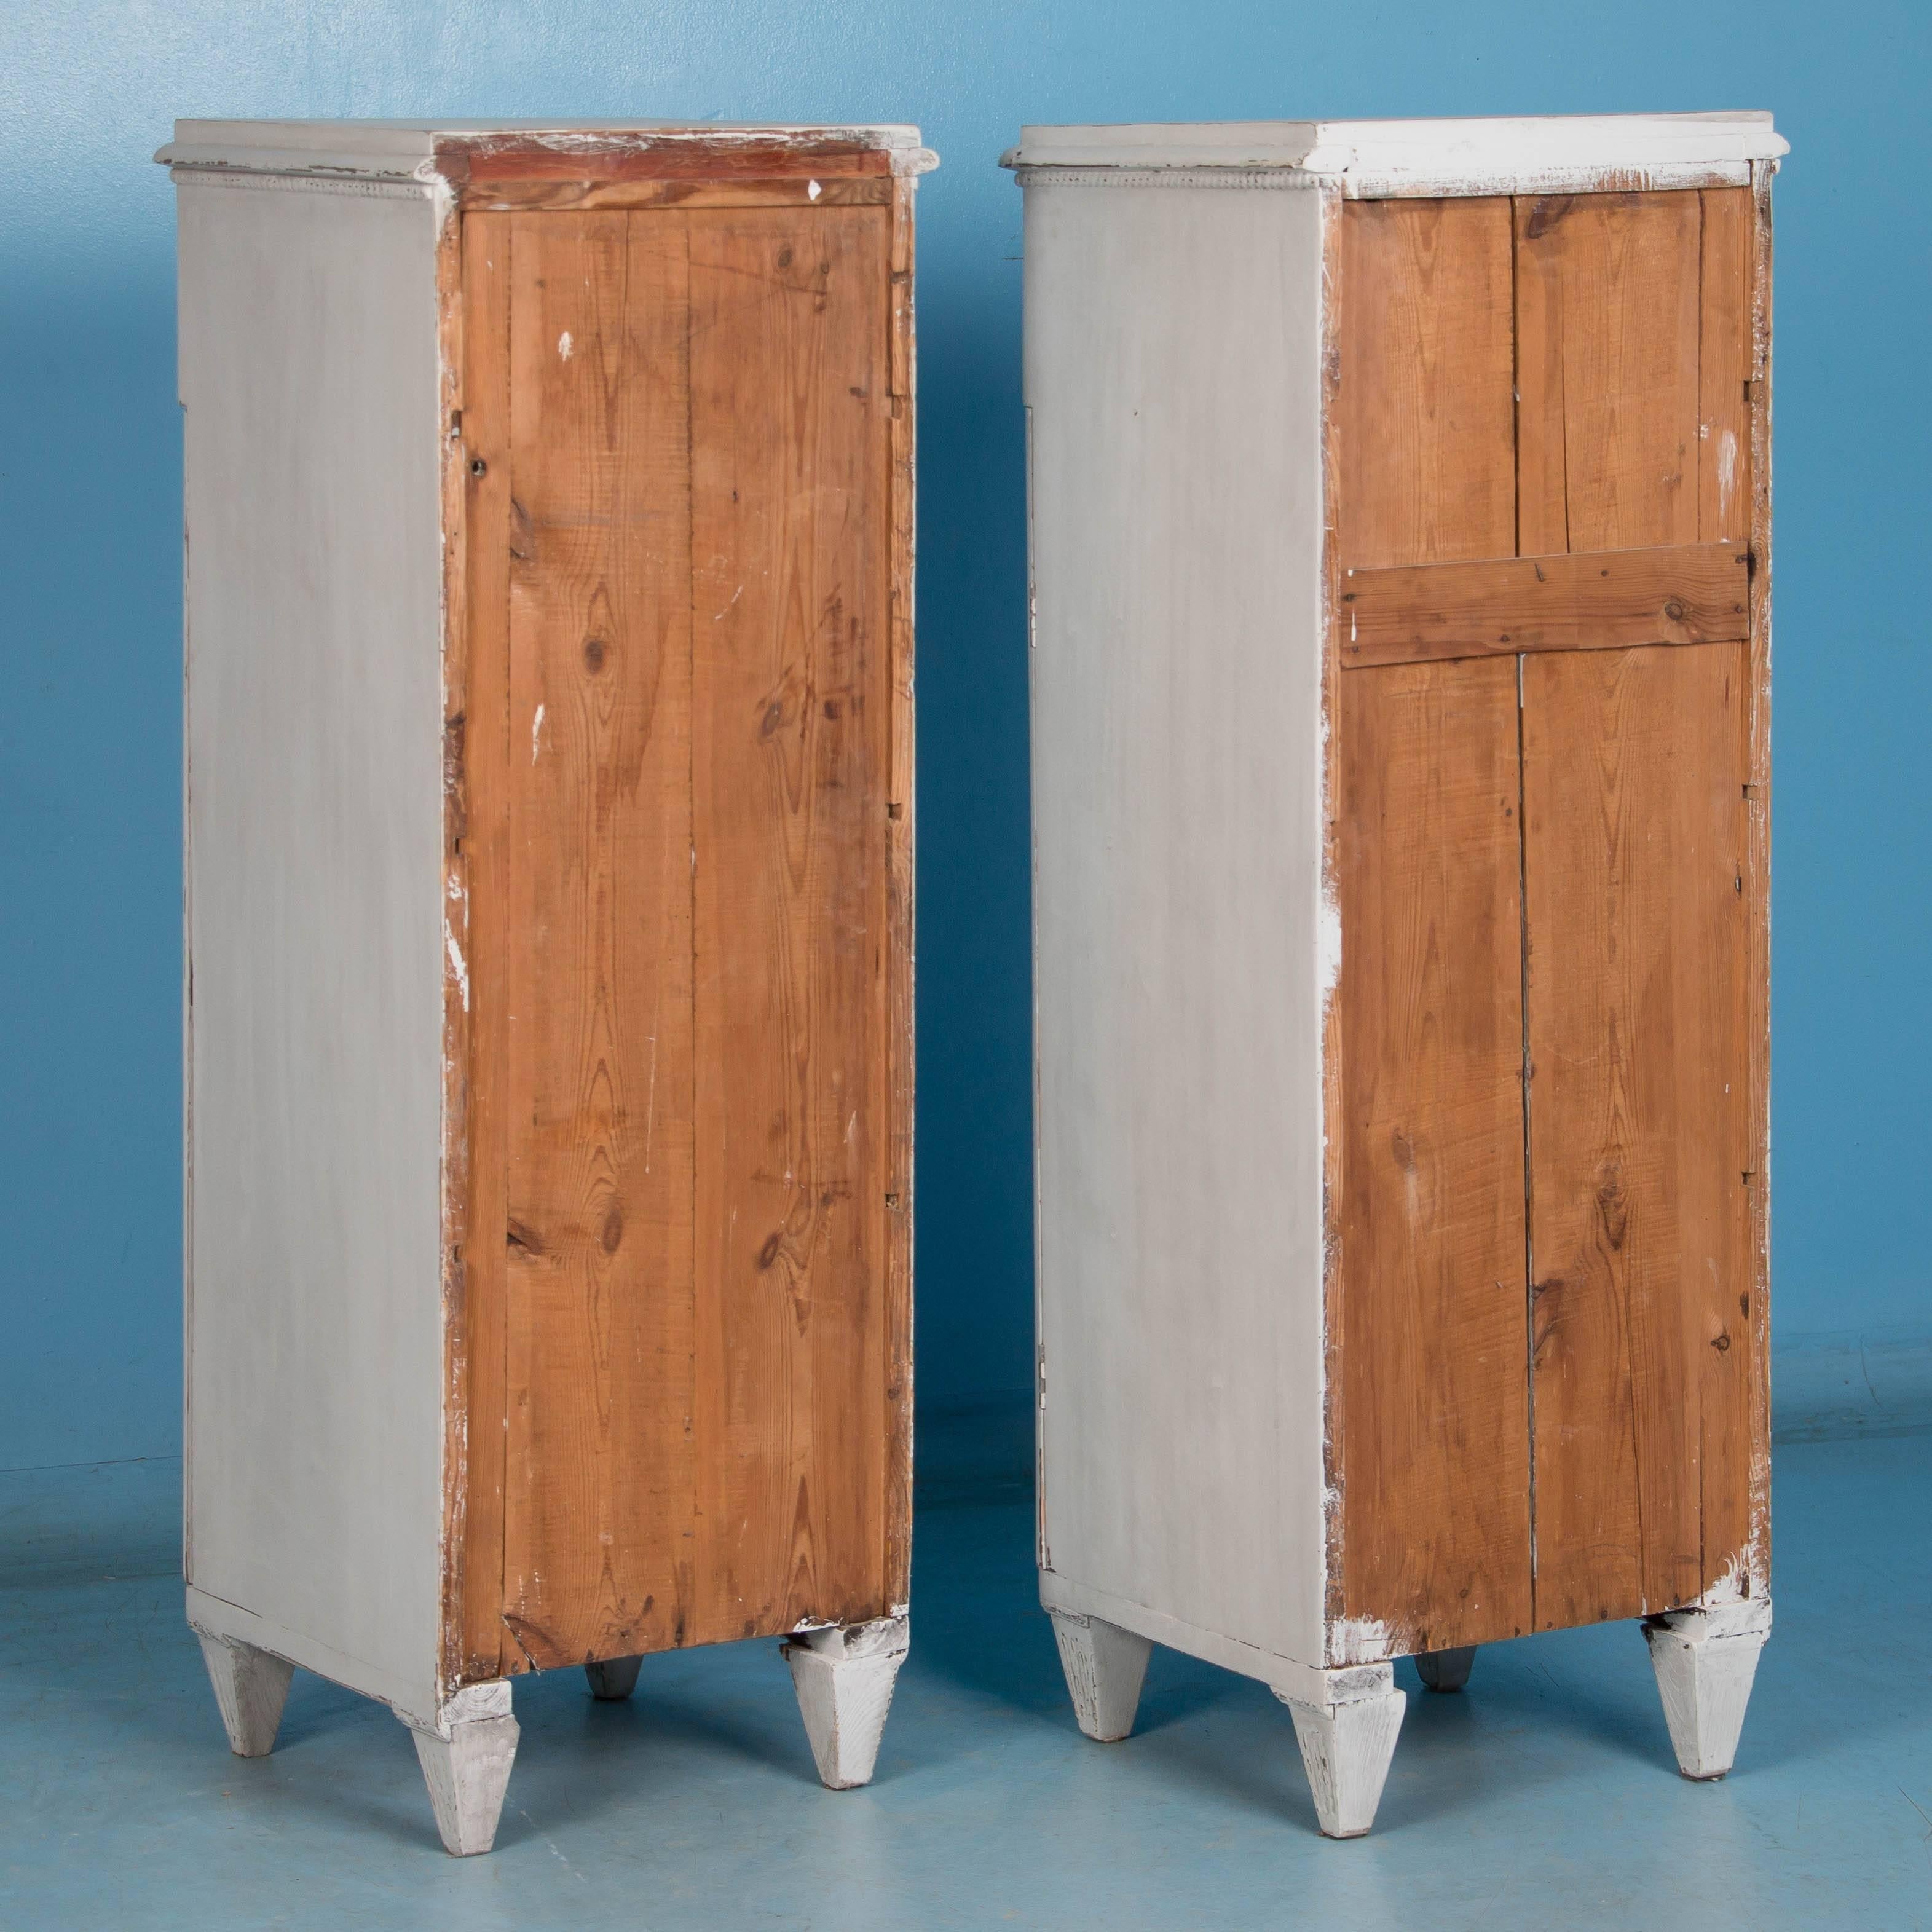 This unique pair of narrow matching cabinets are from the late 1800s and were handcrafted in Sweden. The distressed soft white paint was recently added, fitting the Gustavian style and enhancing the carved fluted panels of both cabinets. The single